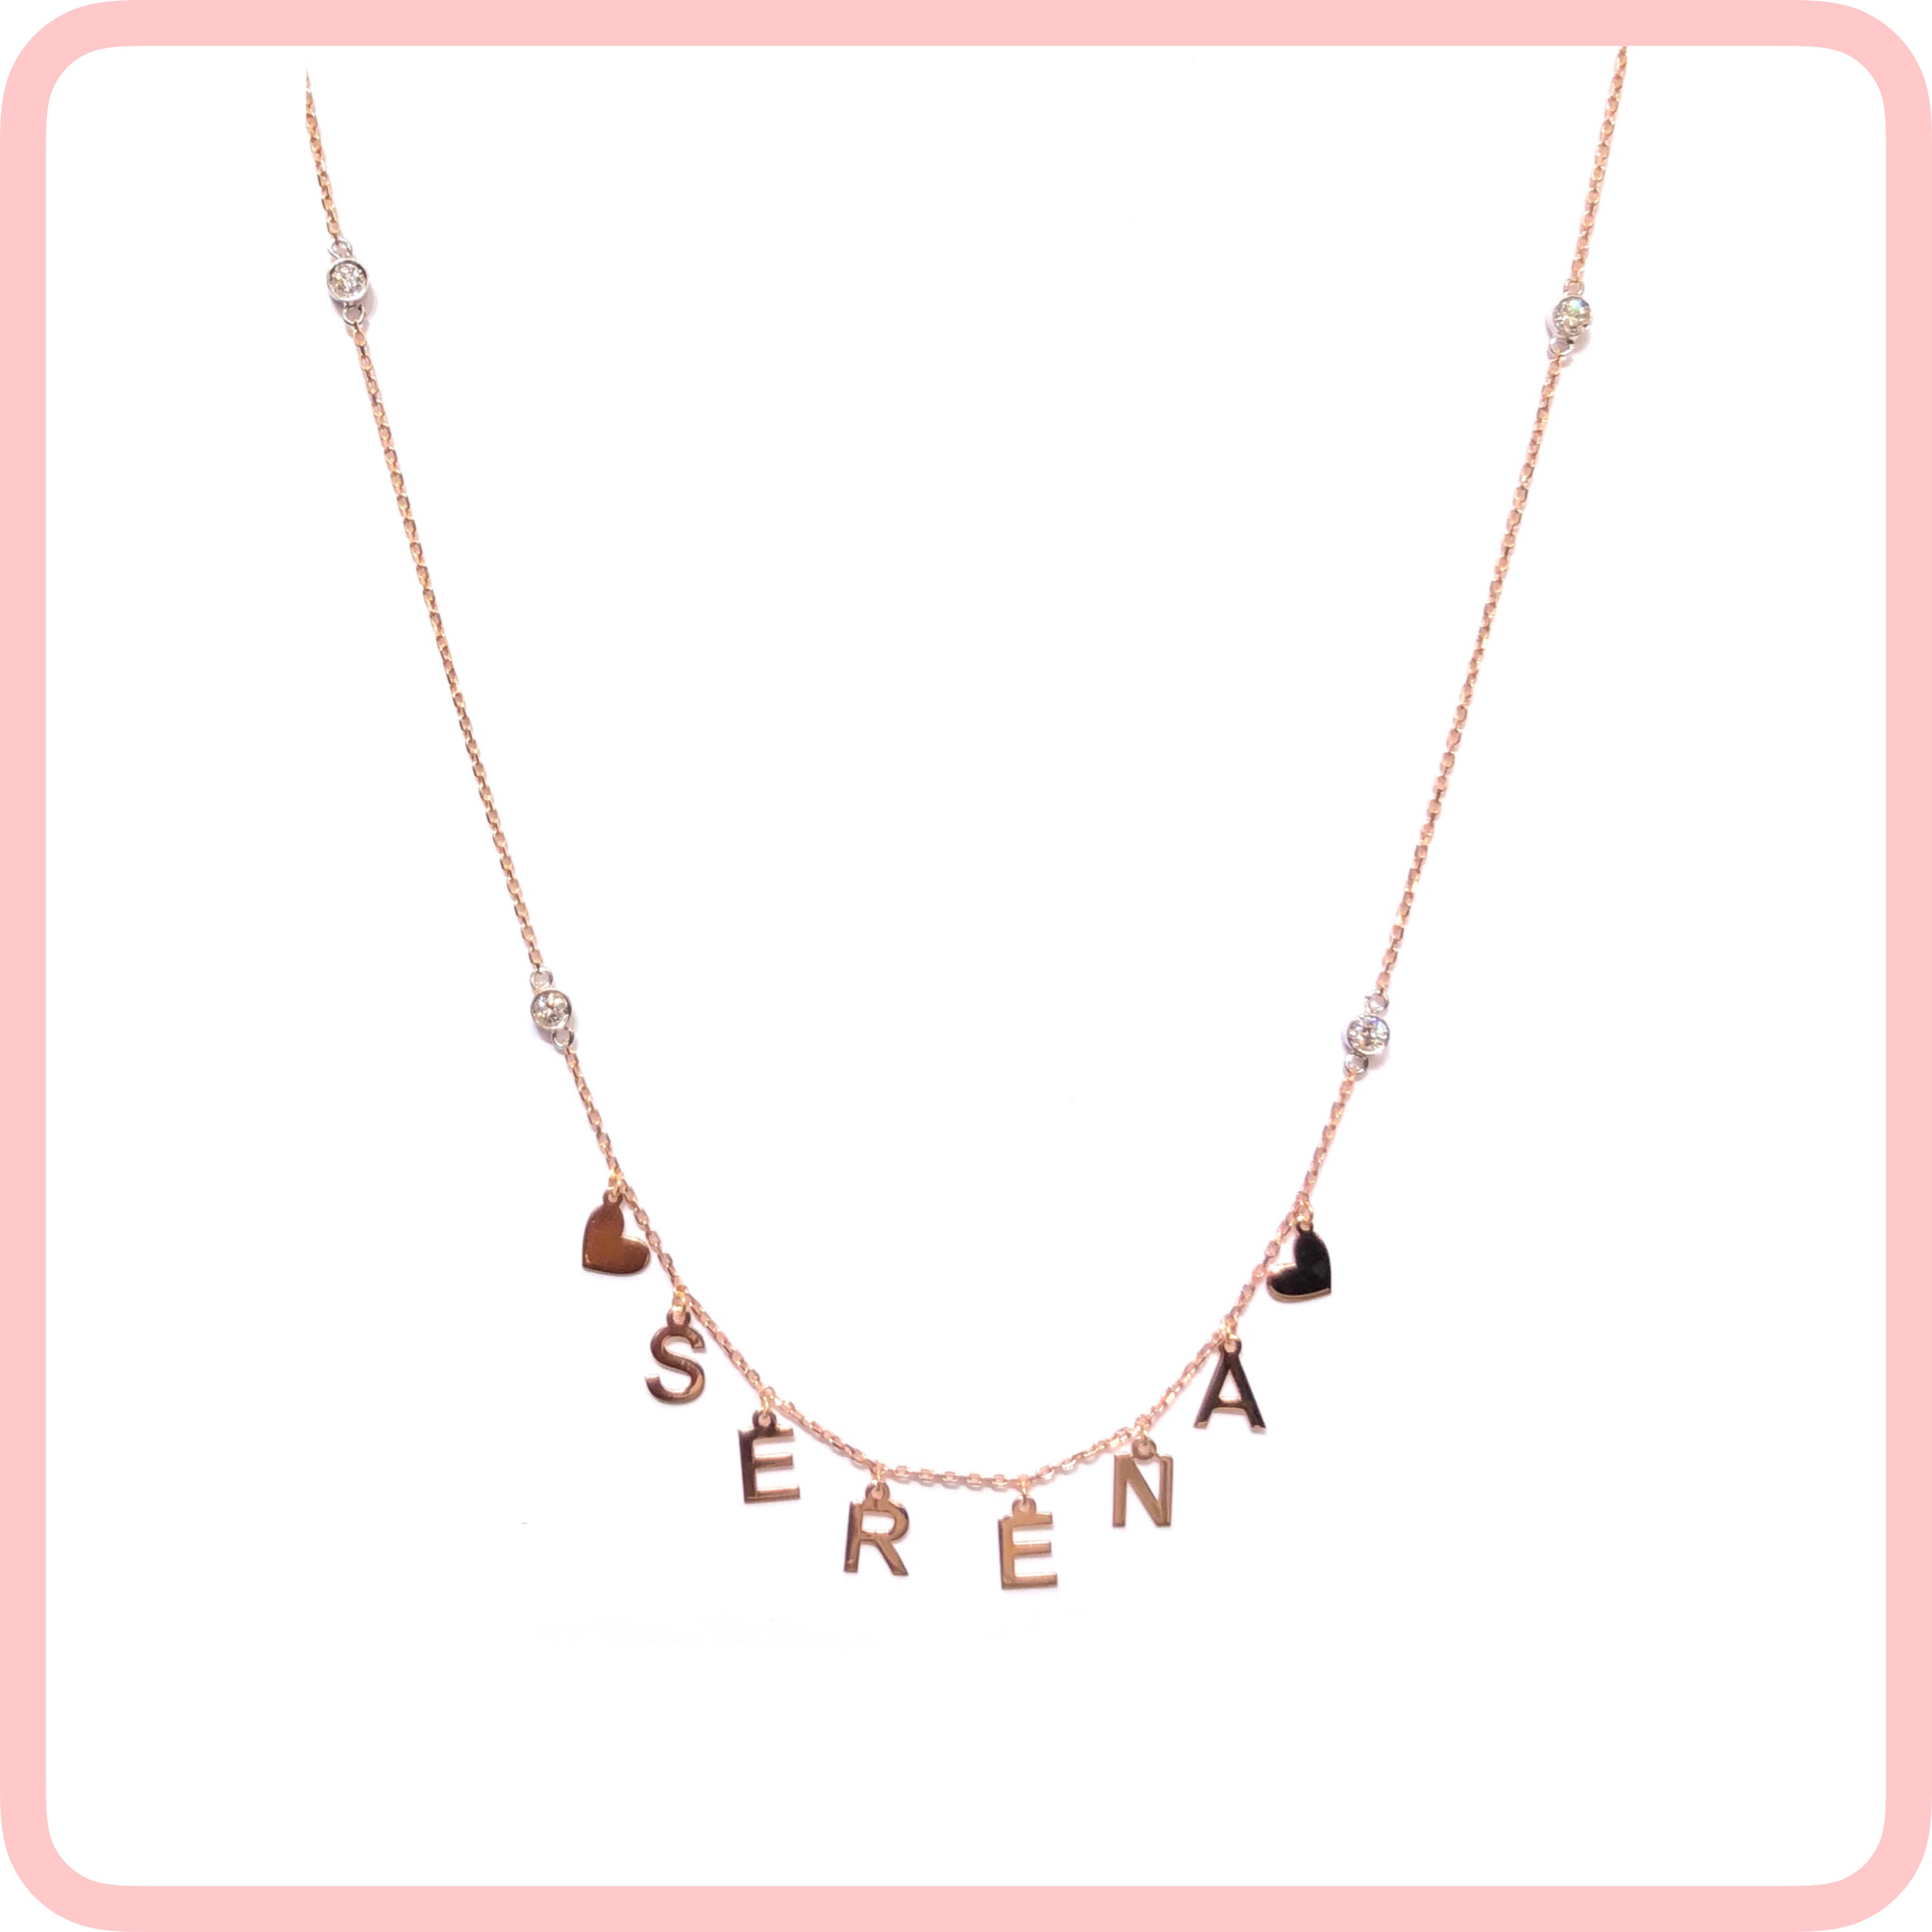 Personalized Hanging Letters With Diamonds Name Necklace